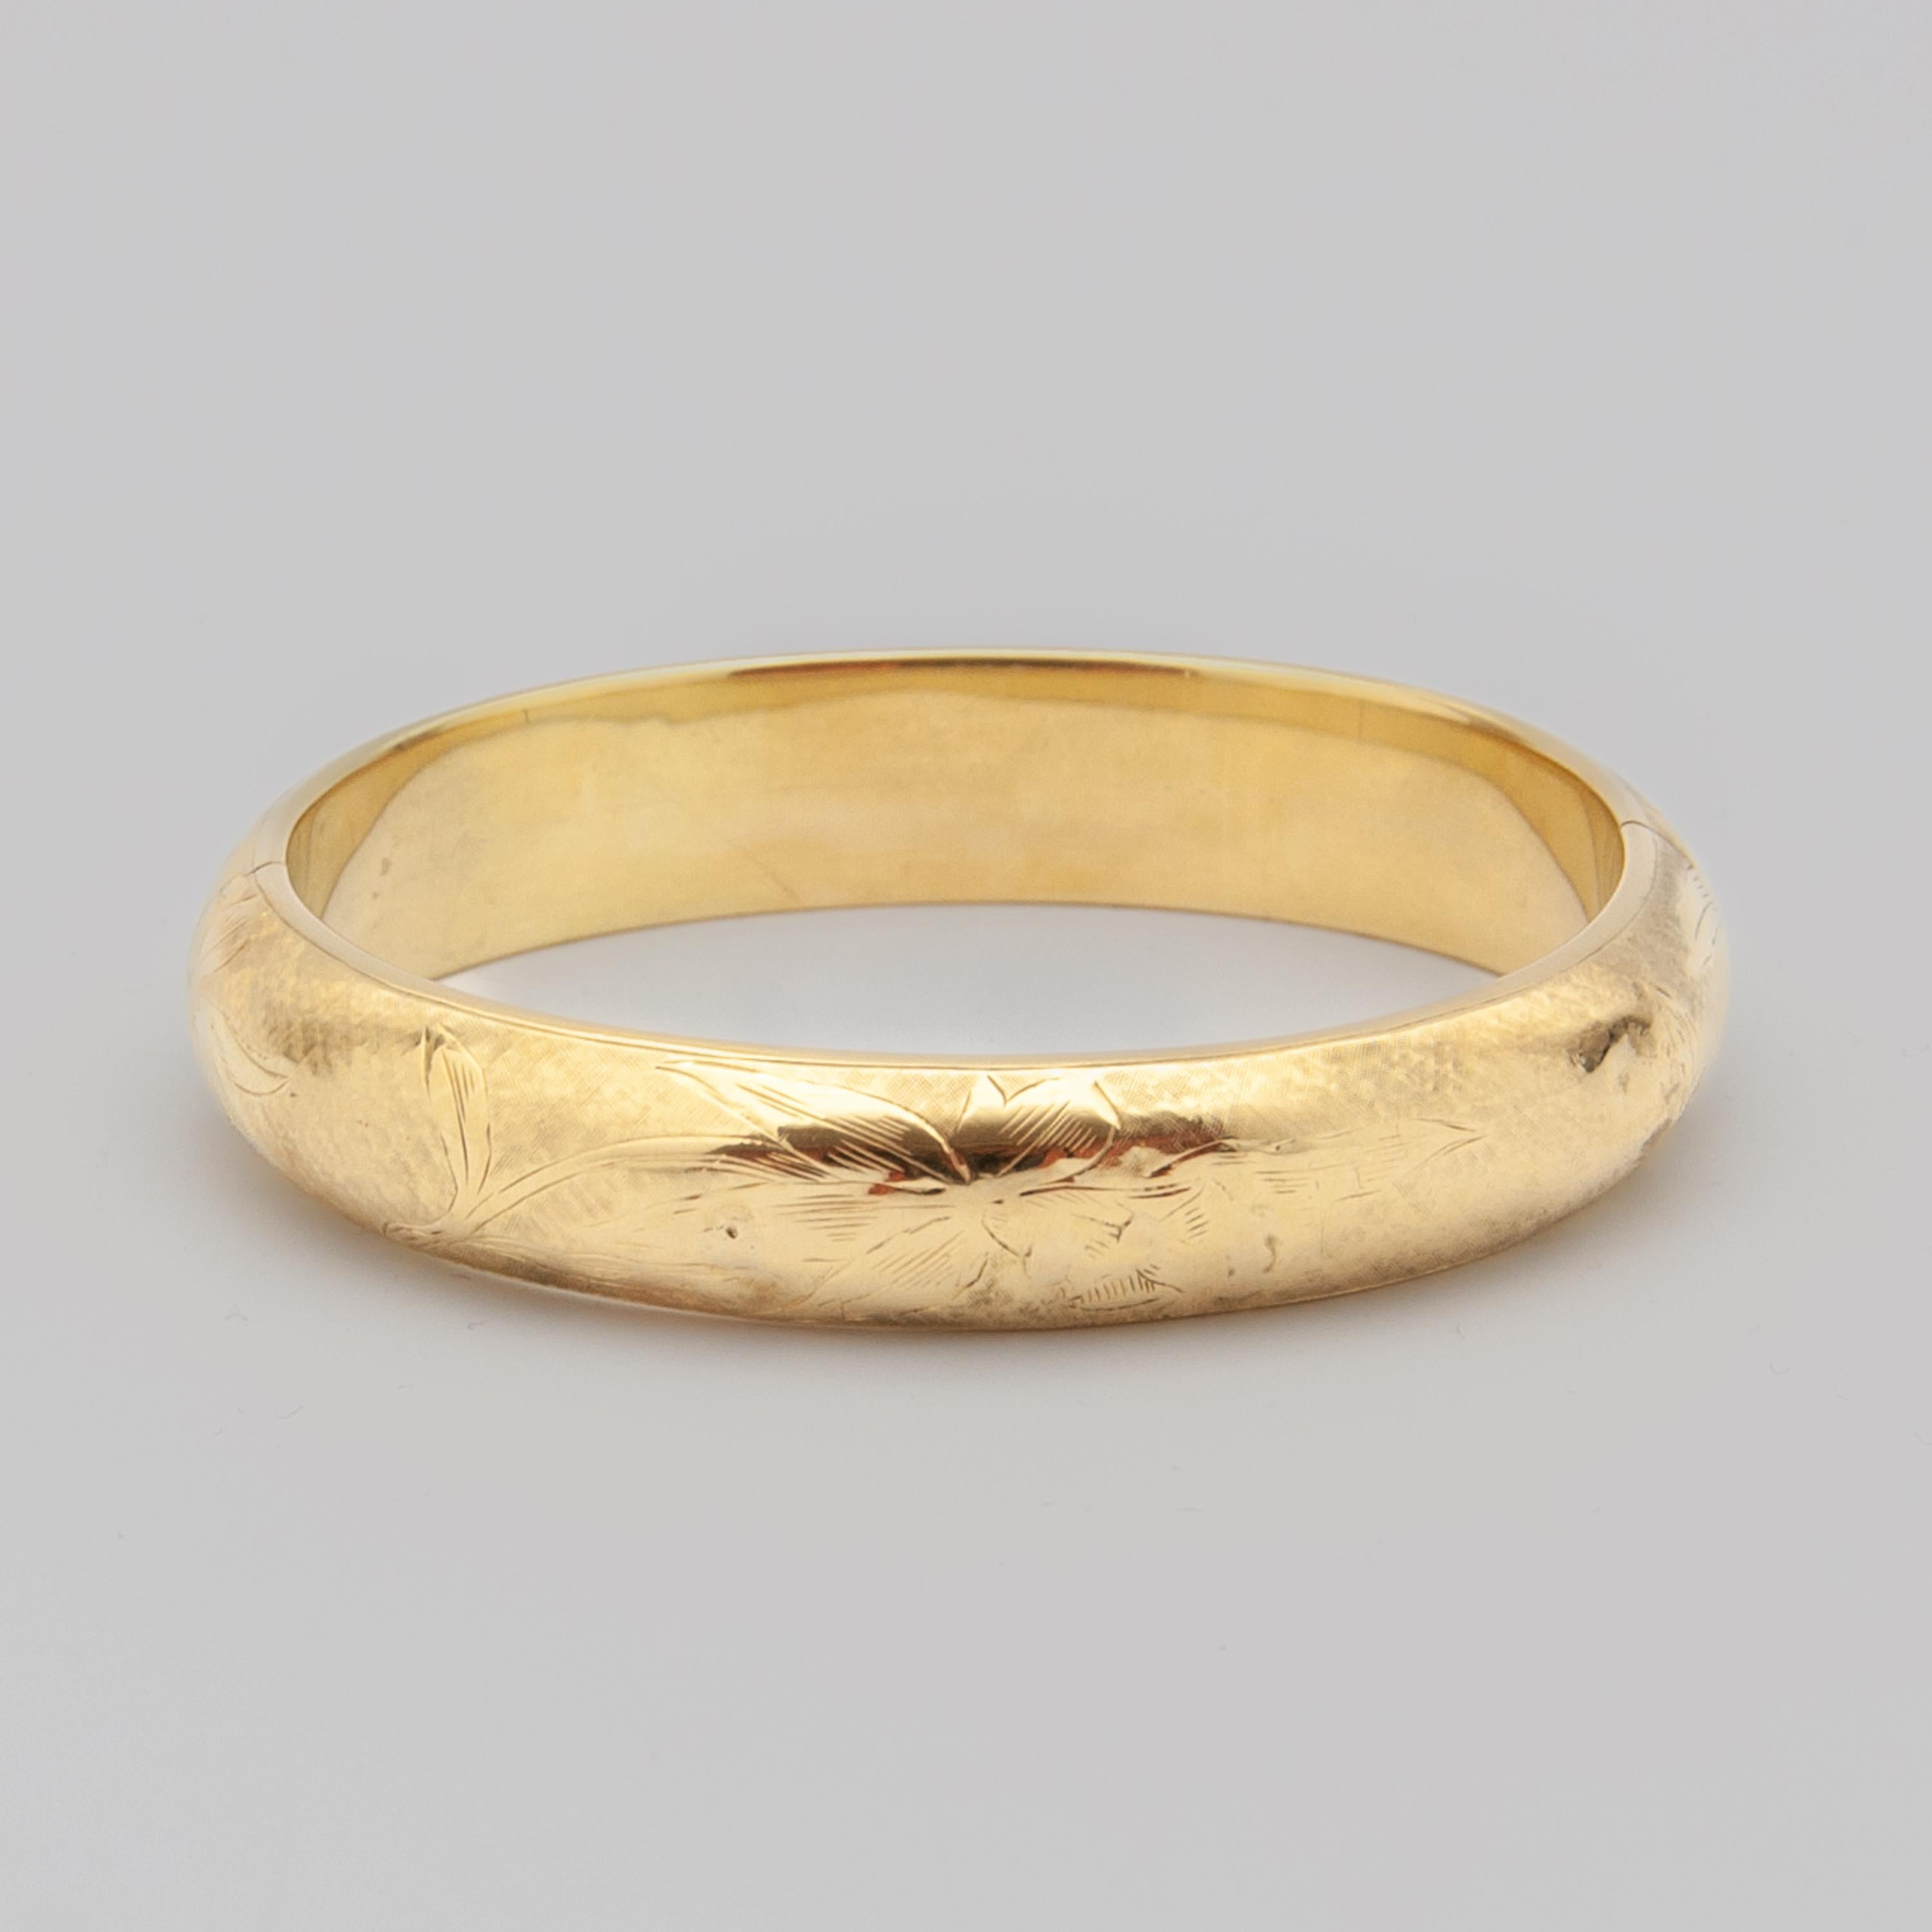 A gorgeous 14 karat gold floral engraved bangle bracelet. The gold bracelet is beautifully satined on its surface and engraved with a floral design. The bangle is hinged on the side and closes with a secure push clasp. This stunning bangle bracelet